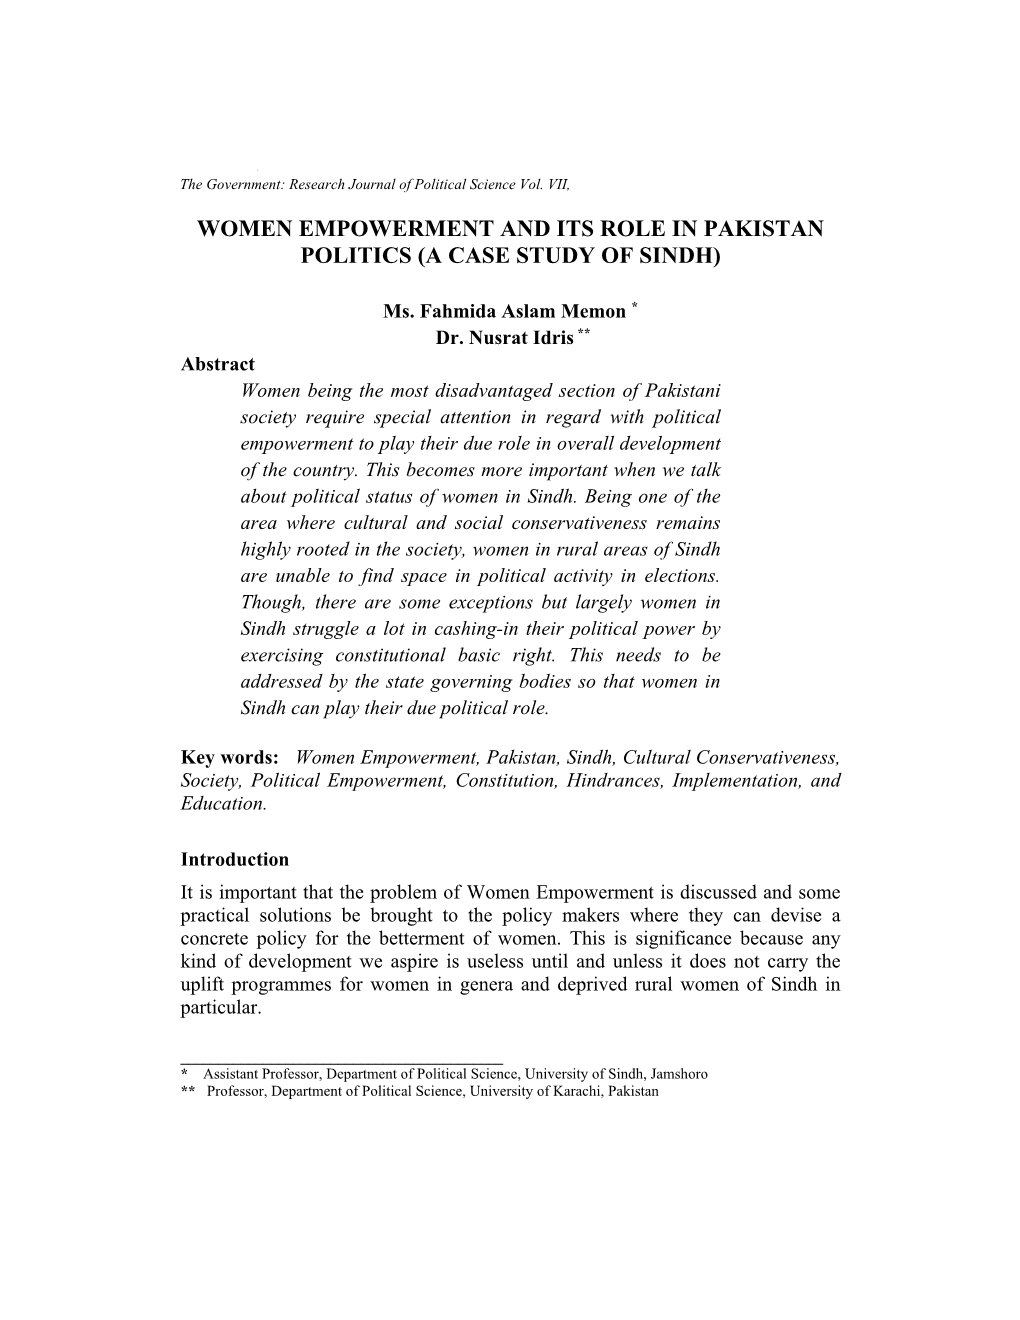 Women Empowerment and Its Role in Pakistan Politics (A Case Study of Sindh)